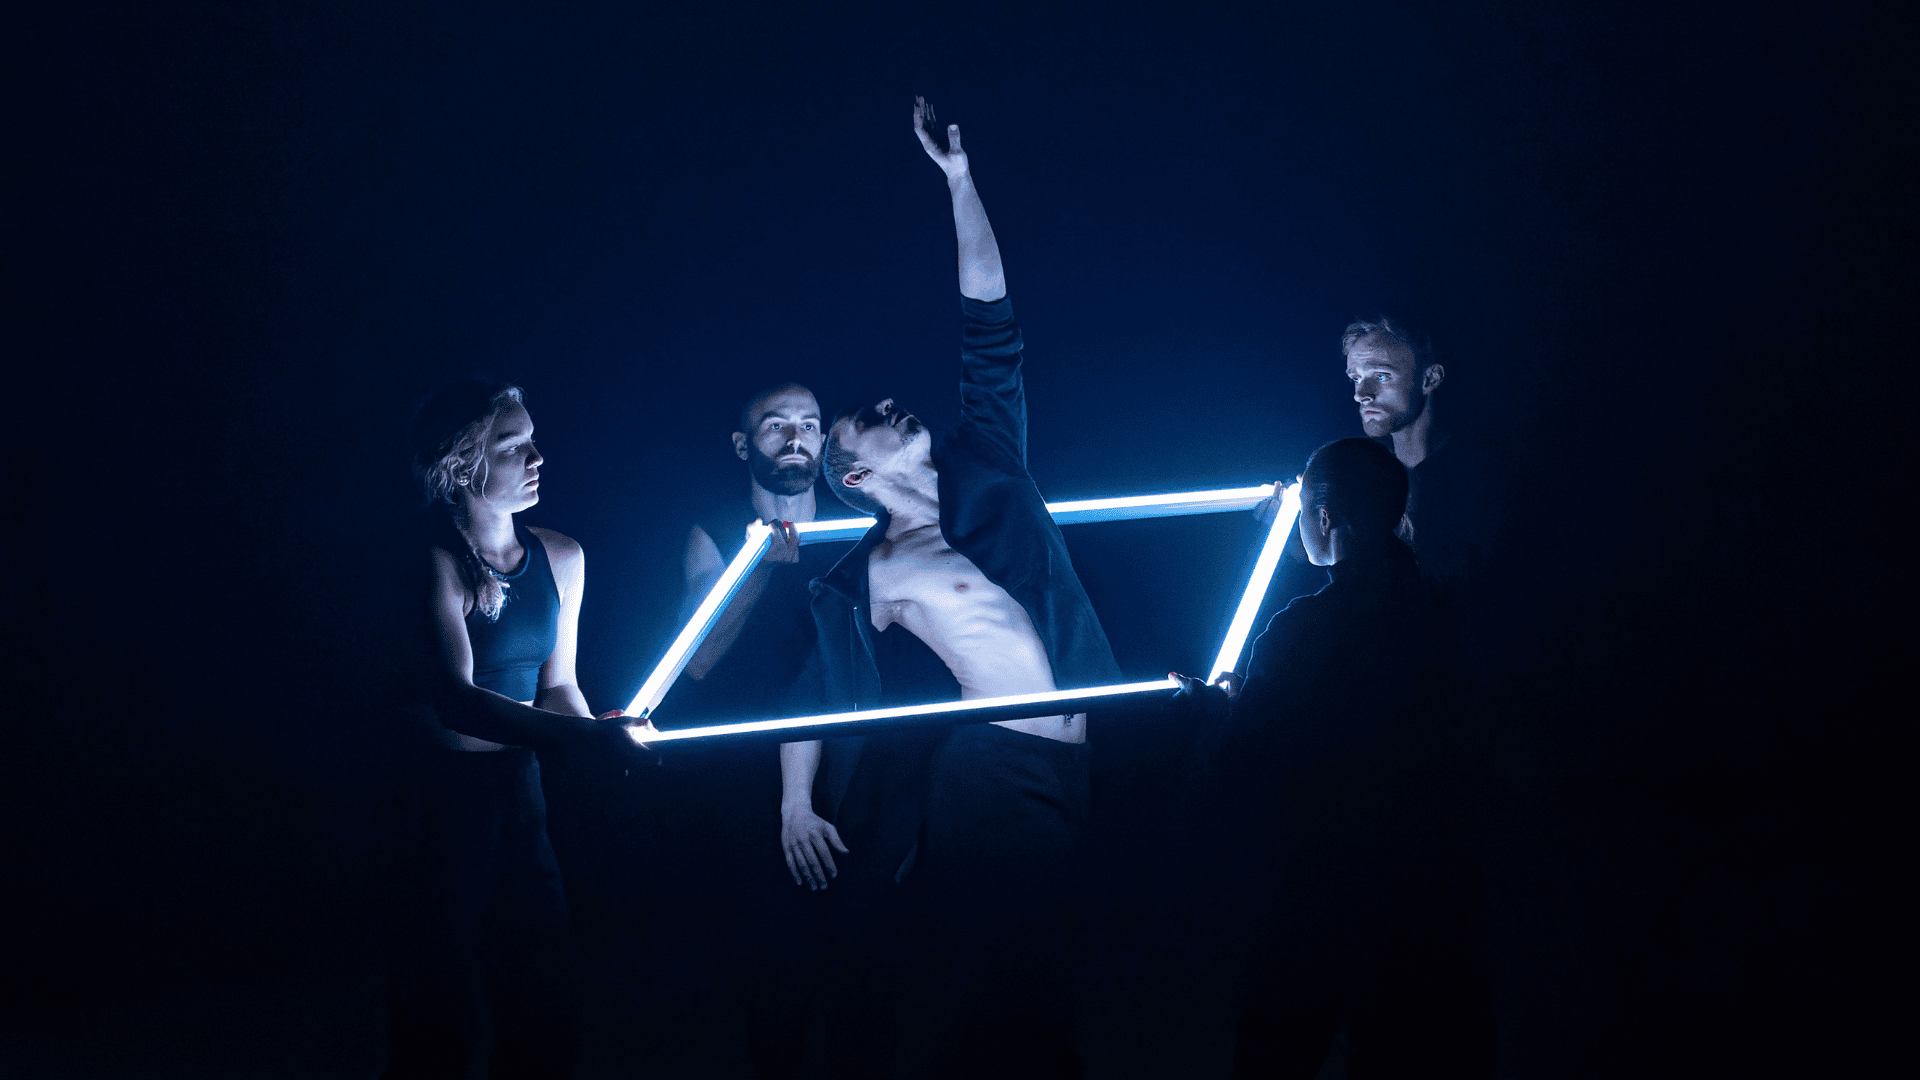 Lewis Major's Satori: A male dancer with open shirt is reaching up through a 3D light box, held up by other dancers